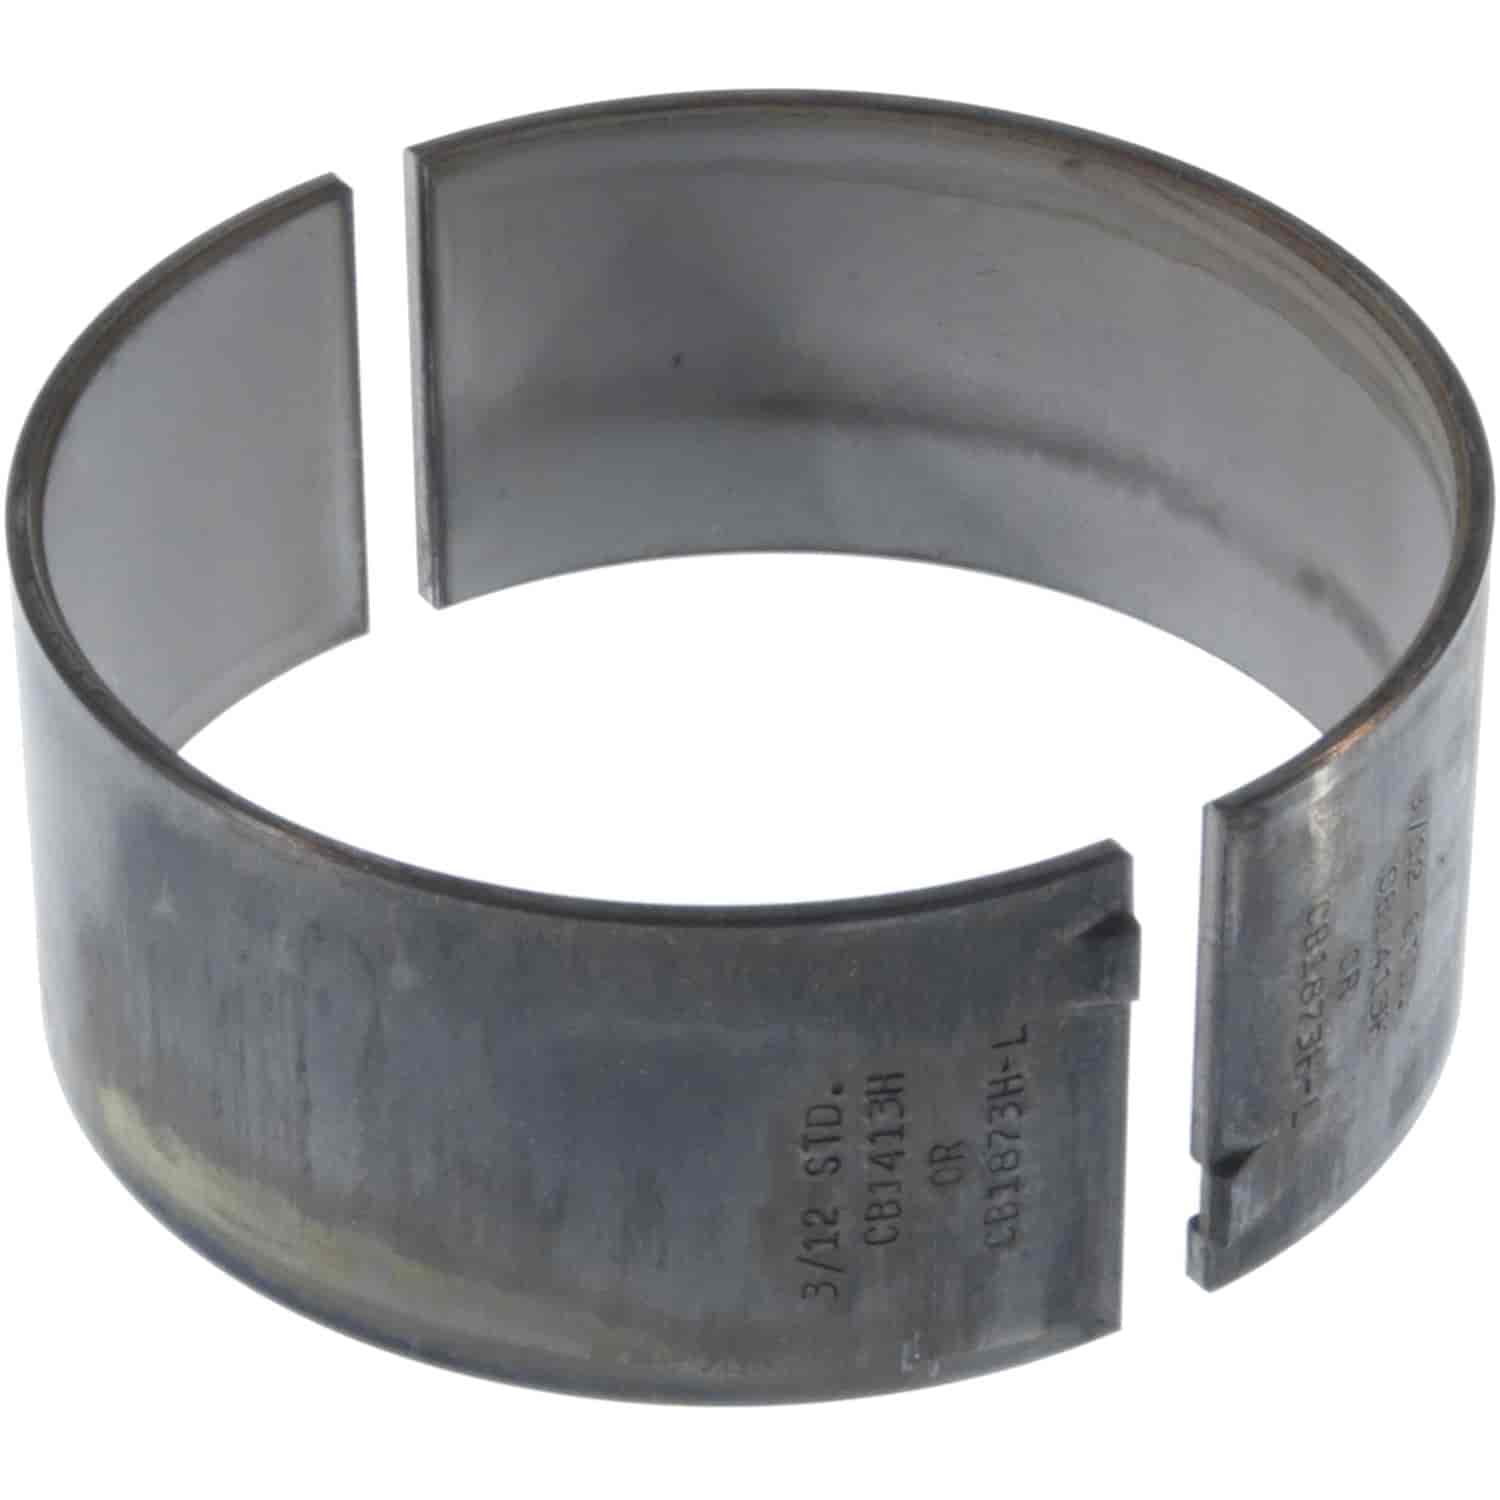 Connecting Rod Bearing Fits Cummins Diesel 1989-2002 4B 3.9L/6B 5.9L Non-Fractured Rod with -.25mm Undersize